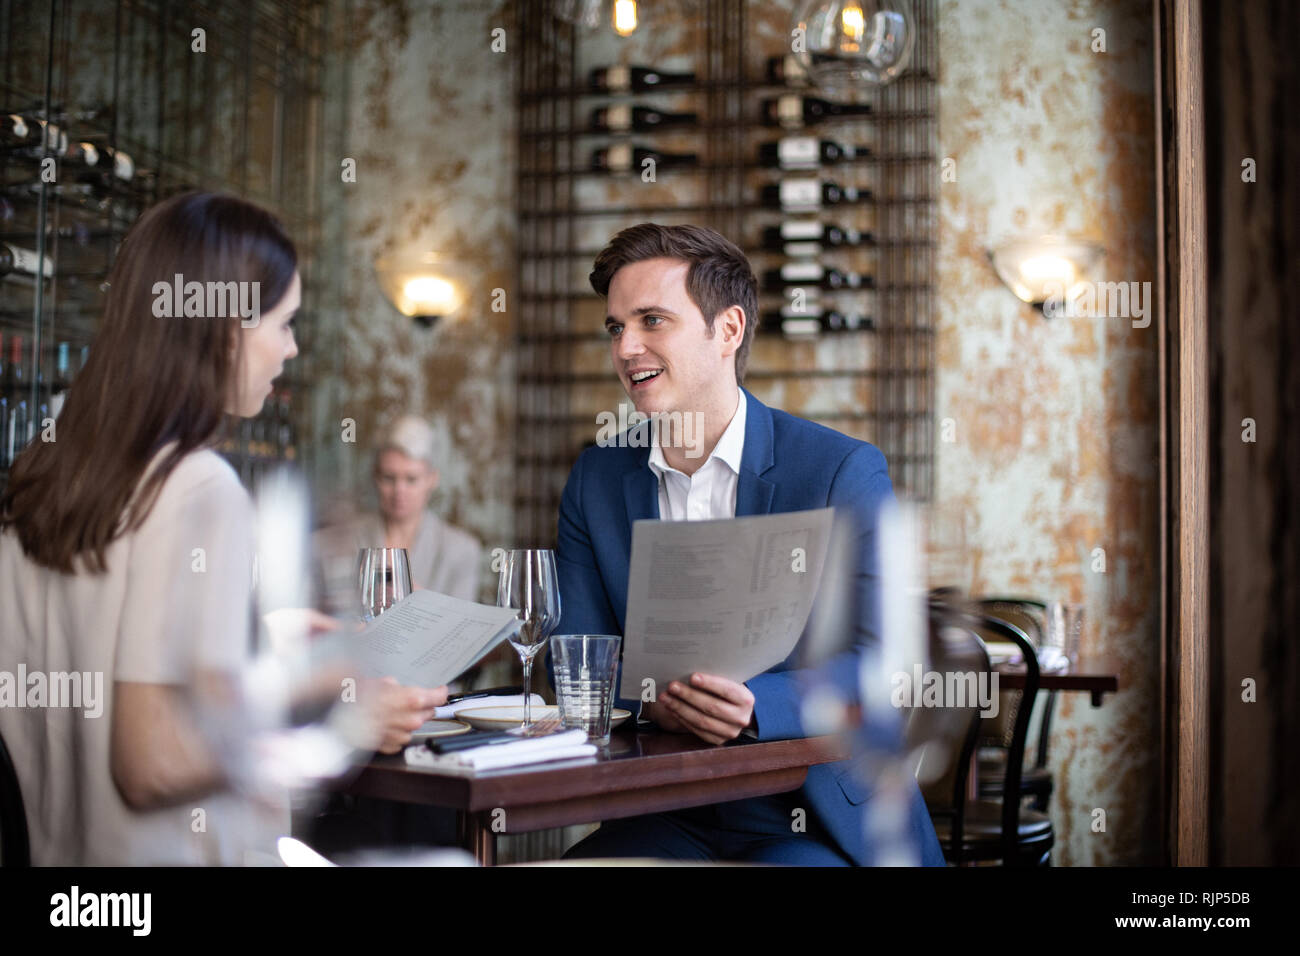 Couple having a meal in a restaurant Stock Photo